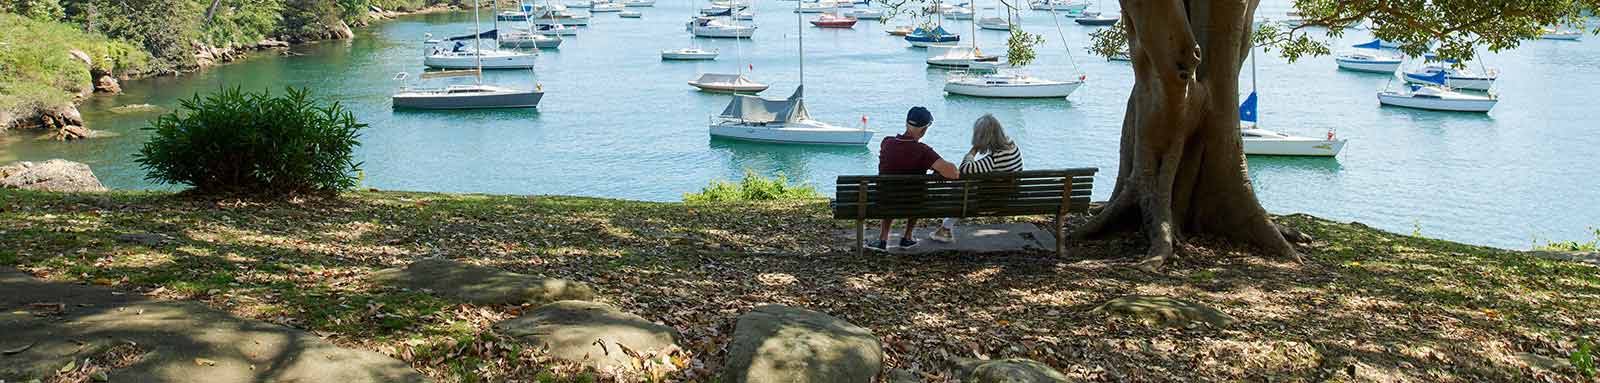 Elderly couple siting on a bench by the sea with boats